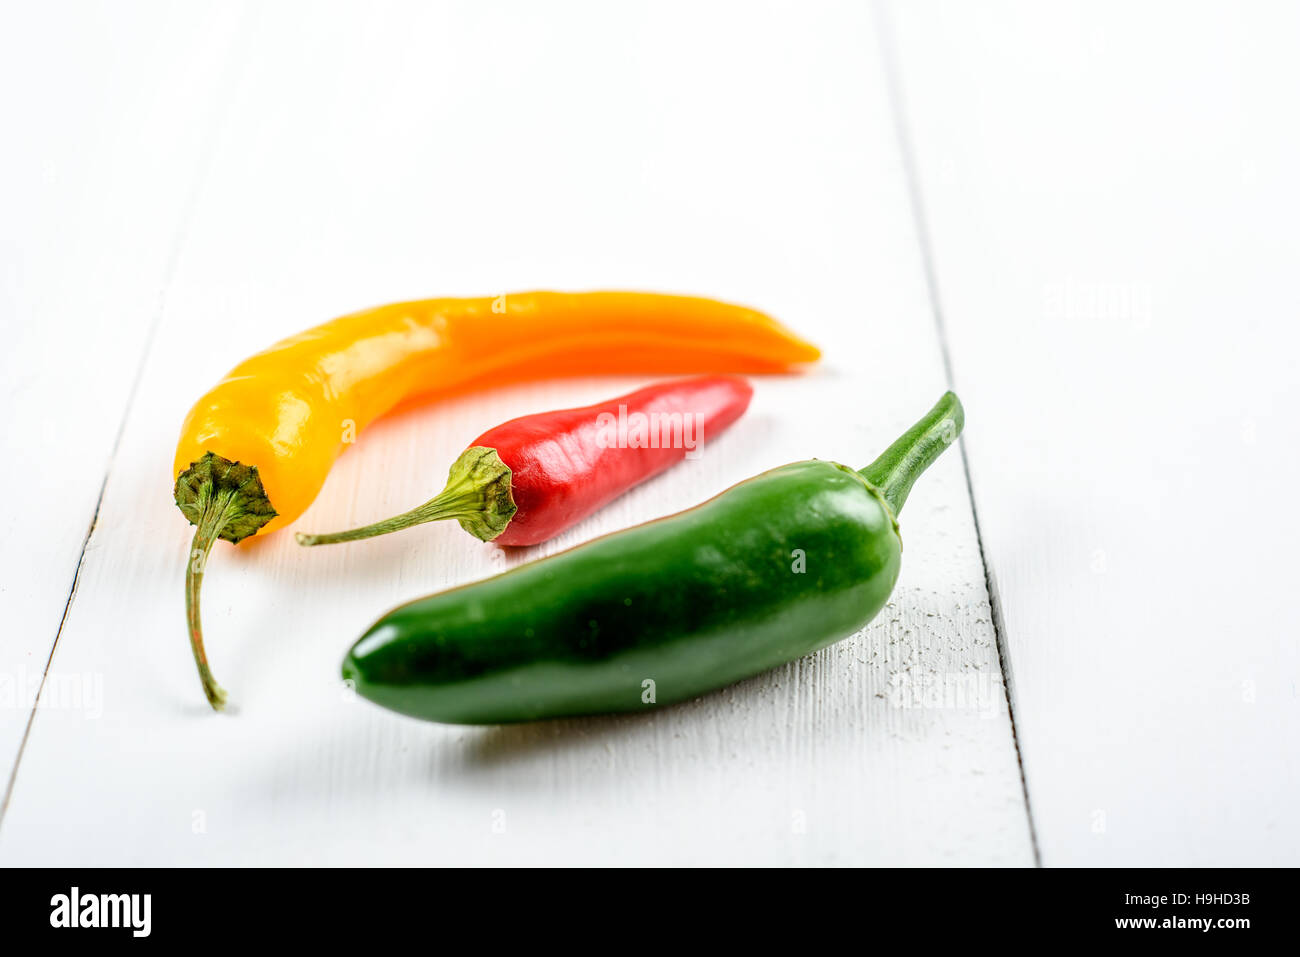 Yellow, Red And Green Chili Pepper On White Stock Photo